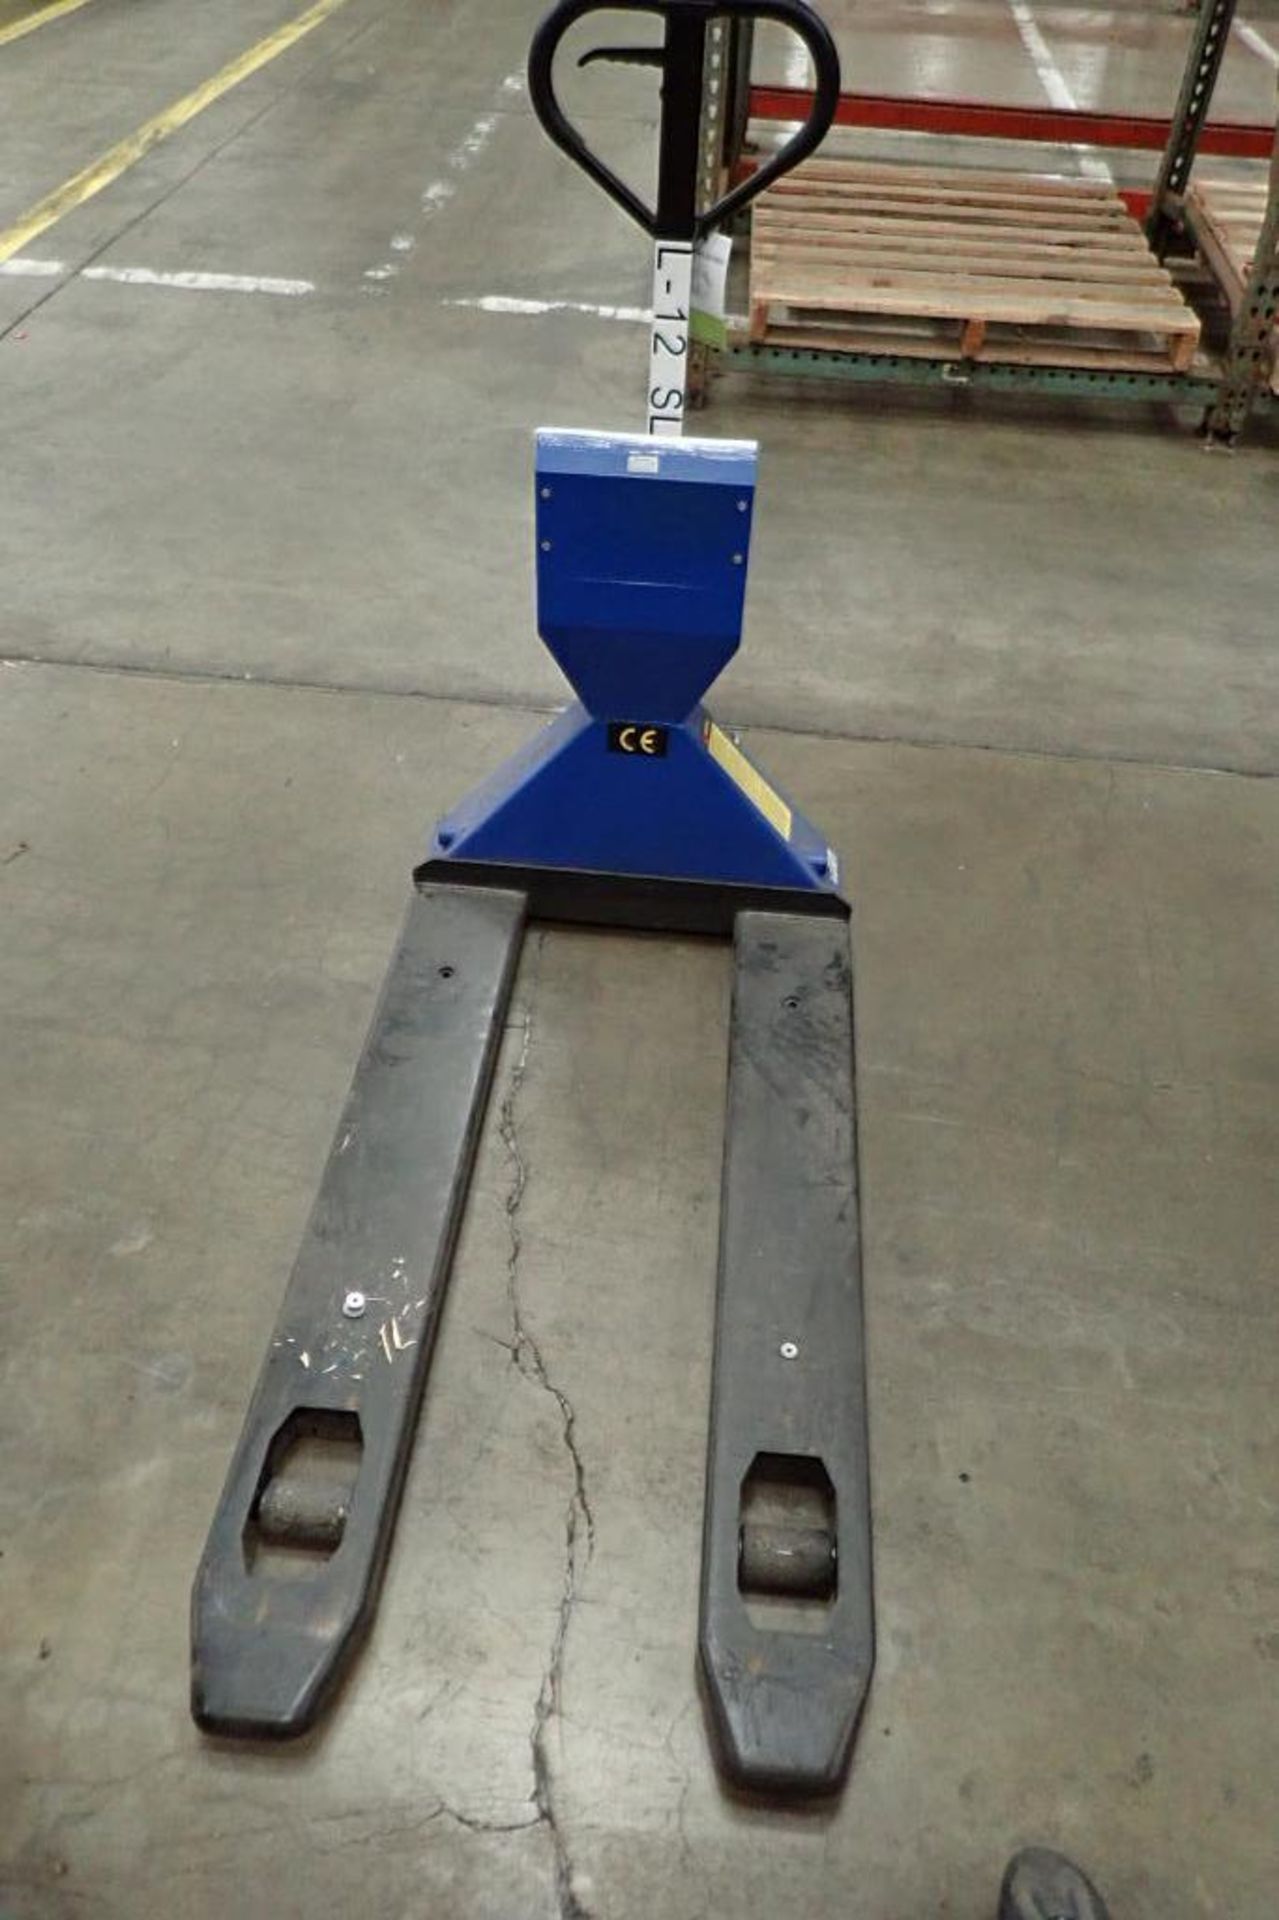 Global Industrial hand pallet jack, SN 377847, with Mettler Toledo on board scale, 5000 lb capacity, - Image 2 of 7